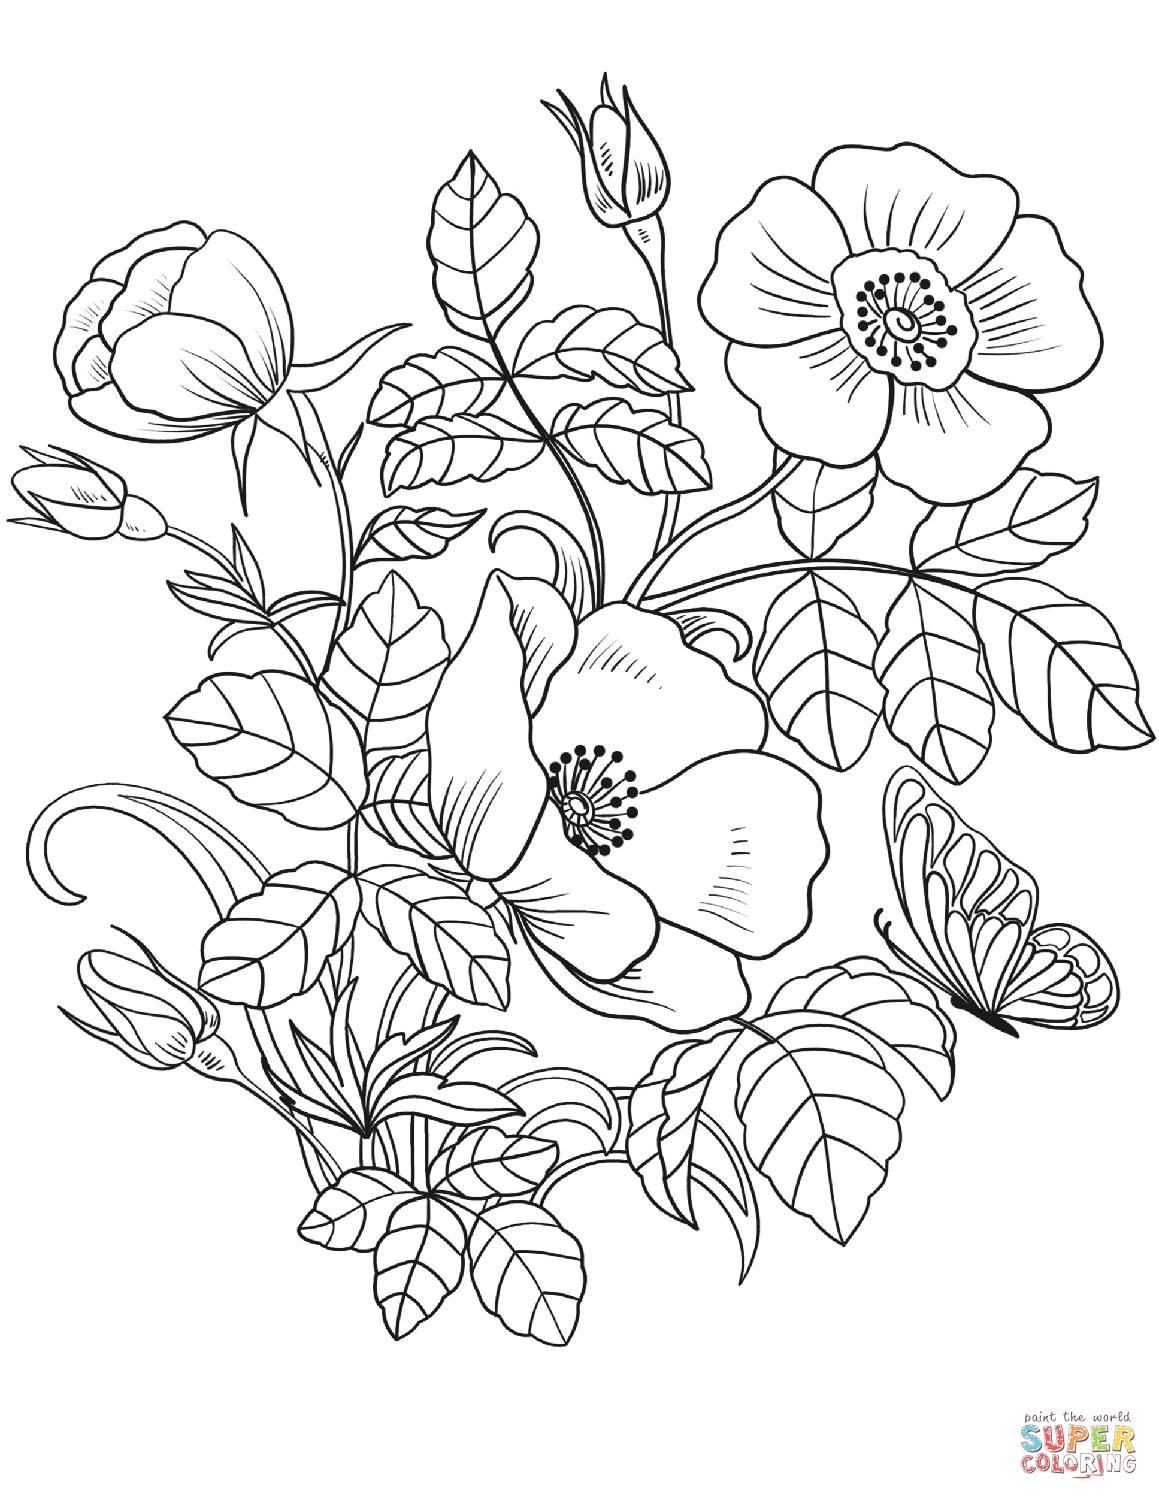 Flower Vine Coloring Pages at GetColorings com Free printable